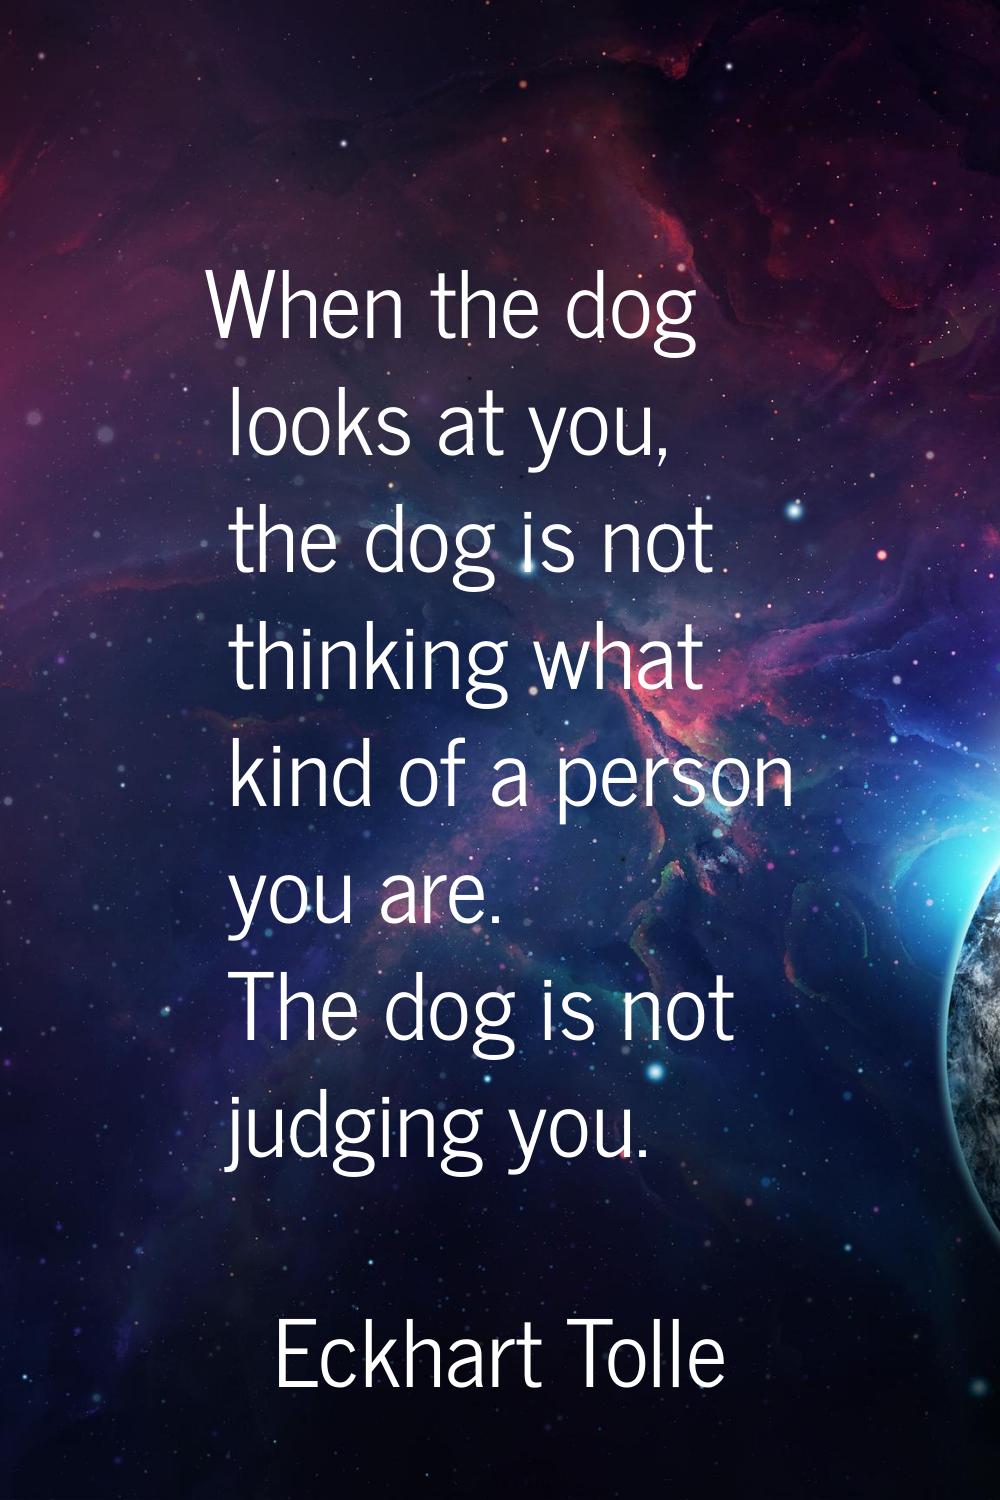 When the dog looks at you, the dog is not thinking what kind of a person you are. The dog is not ju